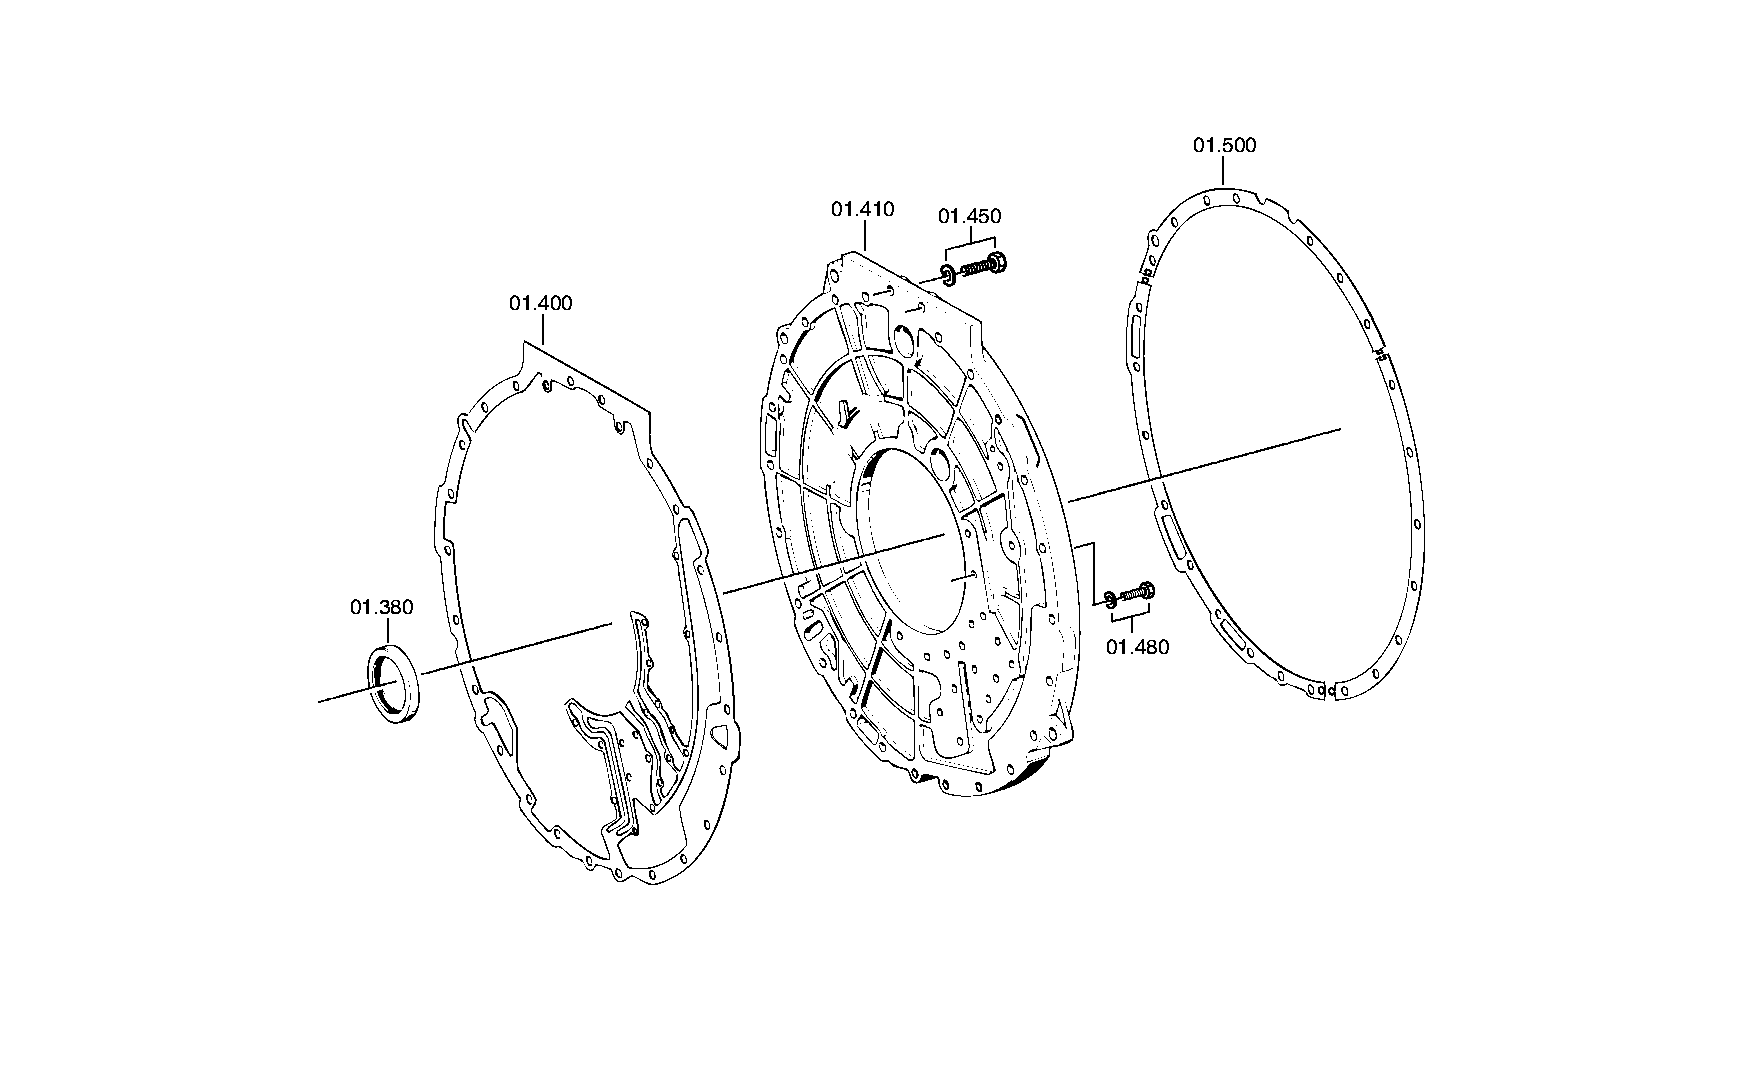 drawing for DAF 66985 - SPRING WASHER (figure 4)